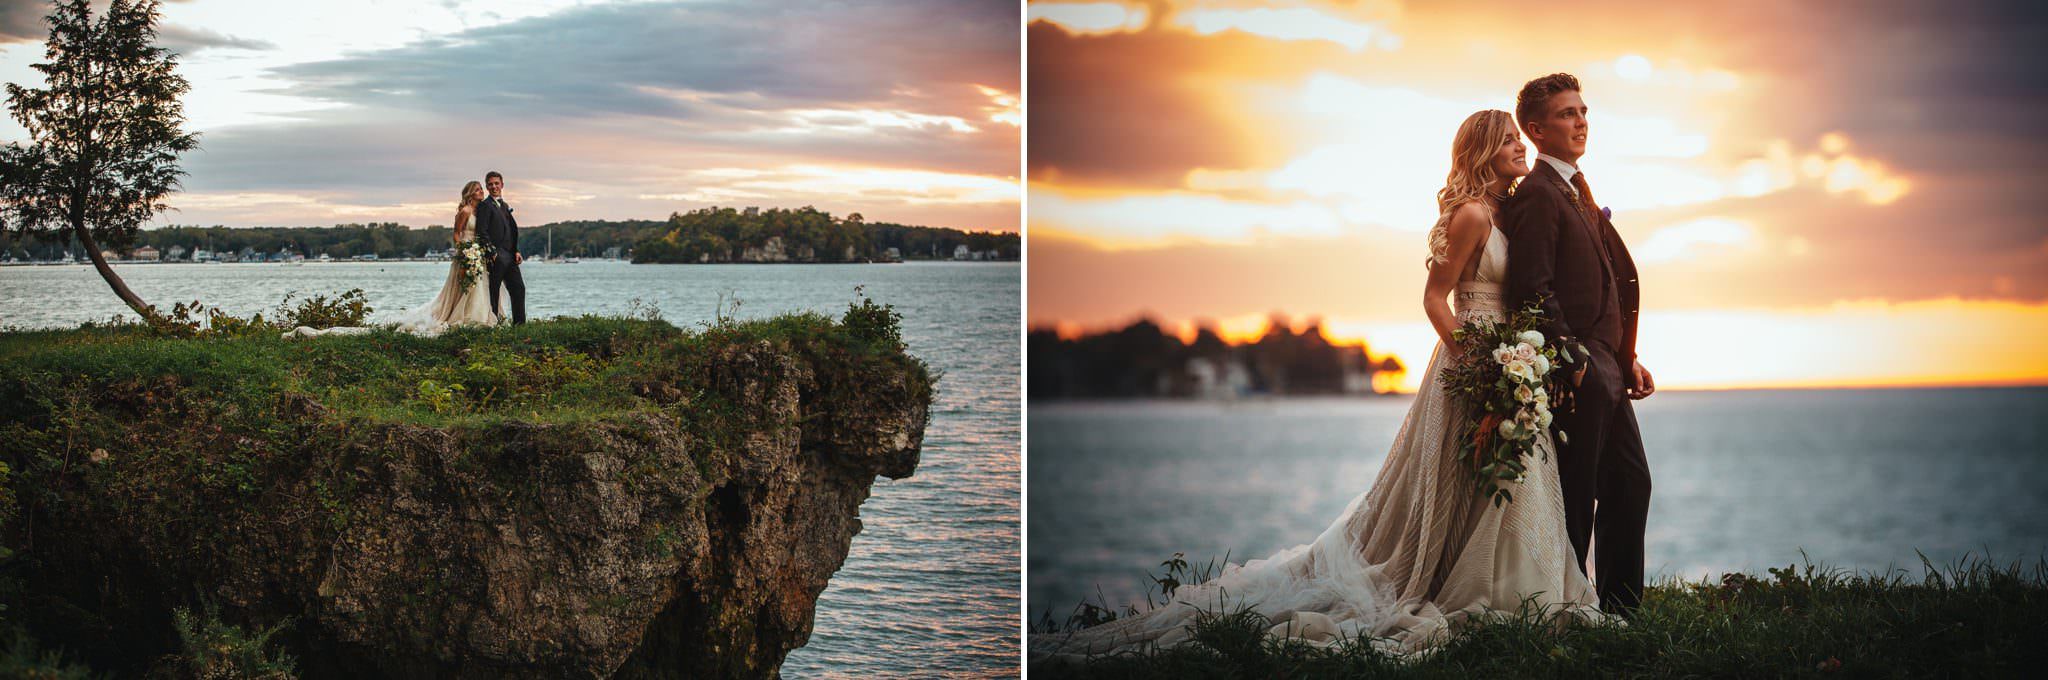 bride and groom sunset photo on a cliff